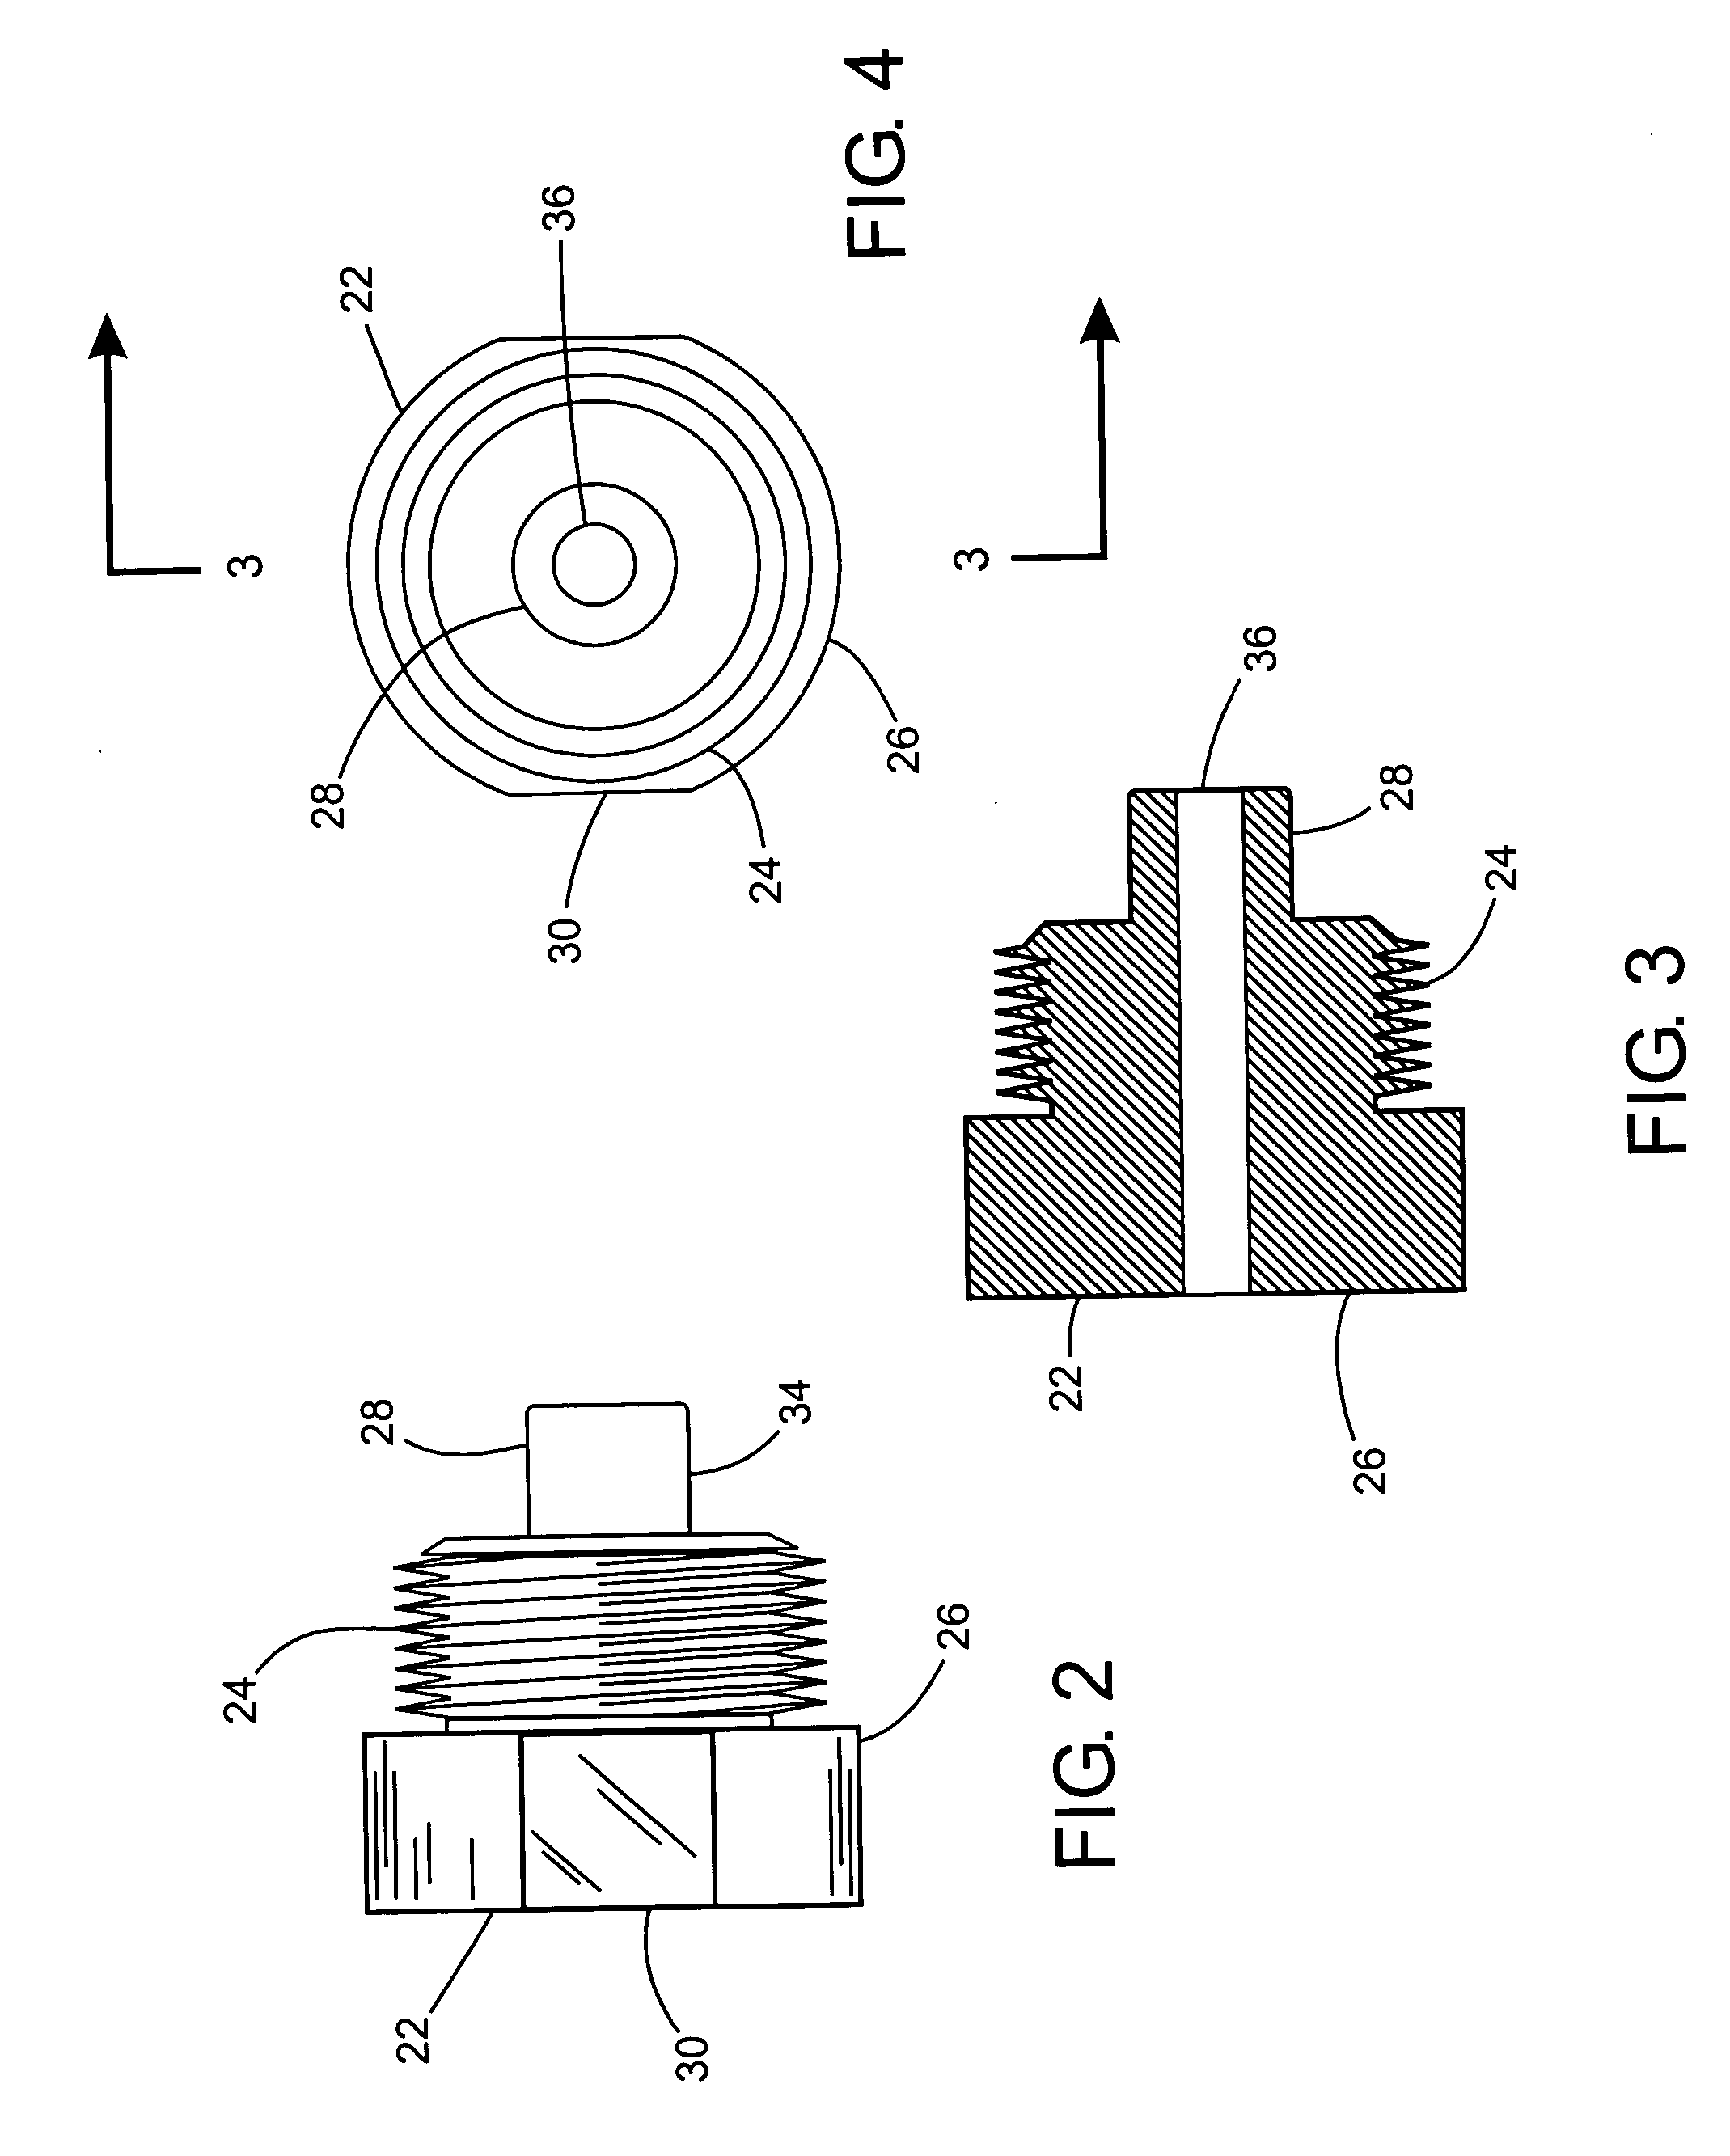 Material stock advancing apparatus and method